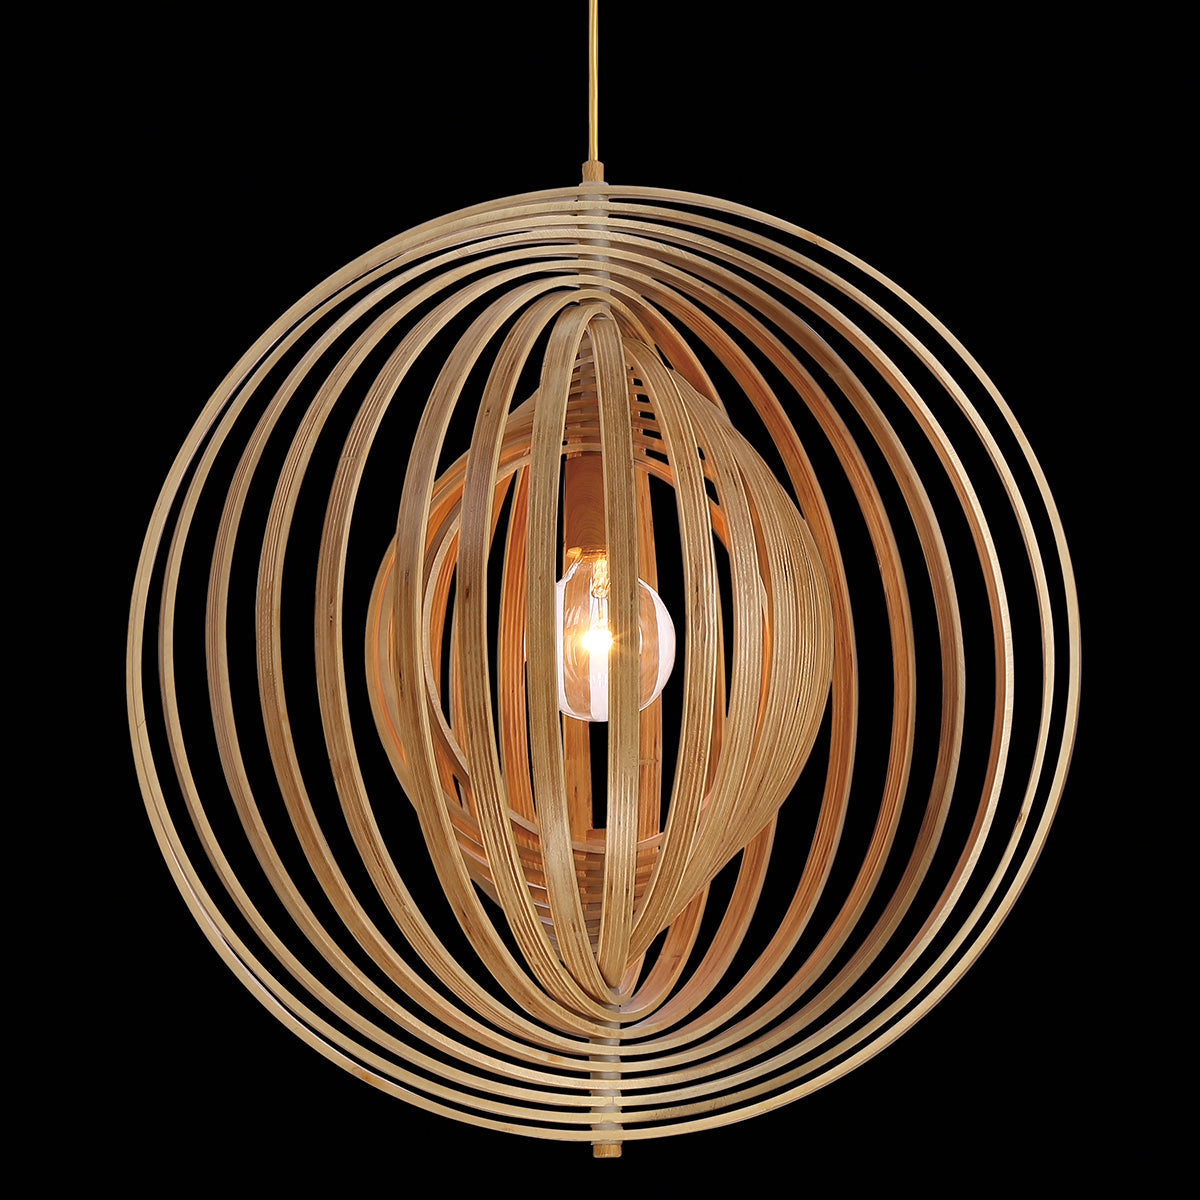 Eurofase Lighting Abruzzo 19" Medium Round Dimmable Incandescent Natural Wood Pendant Light With Retractable Rings Shade